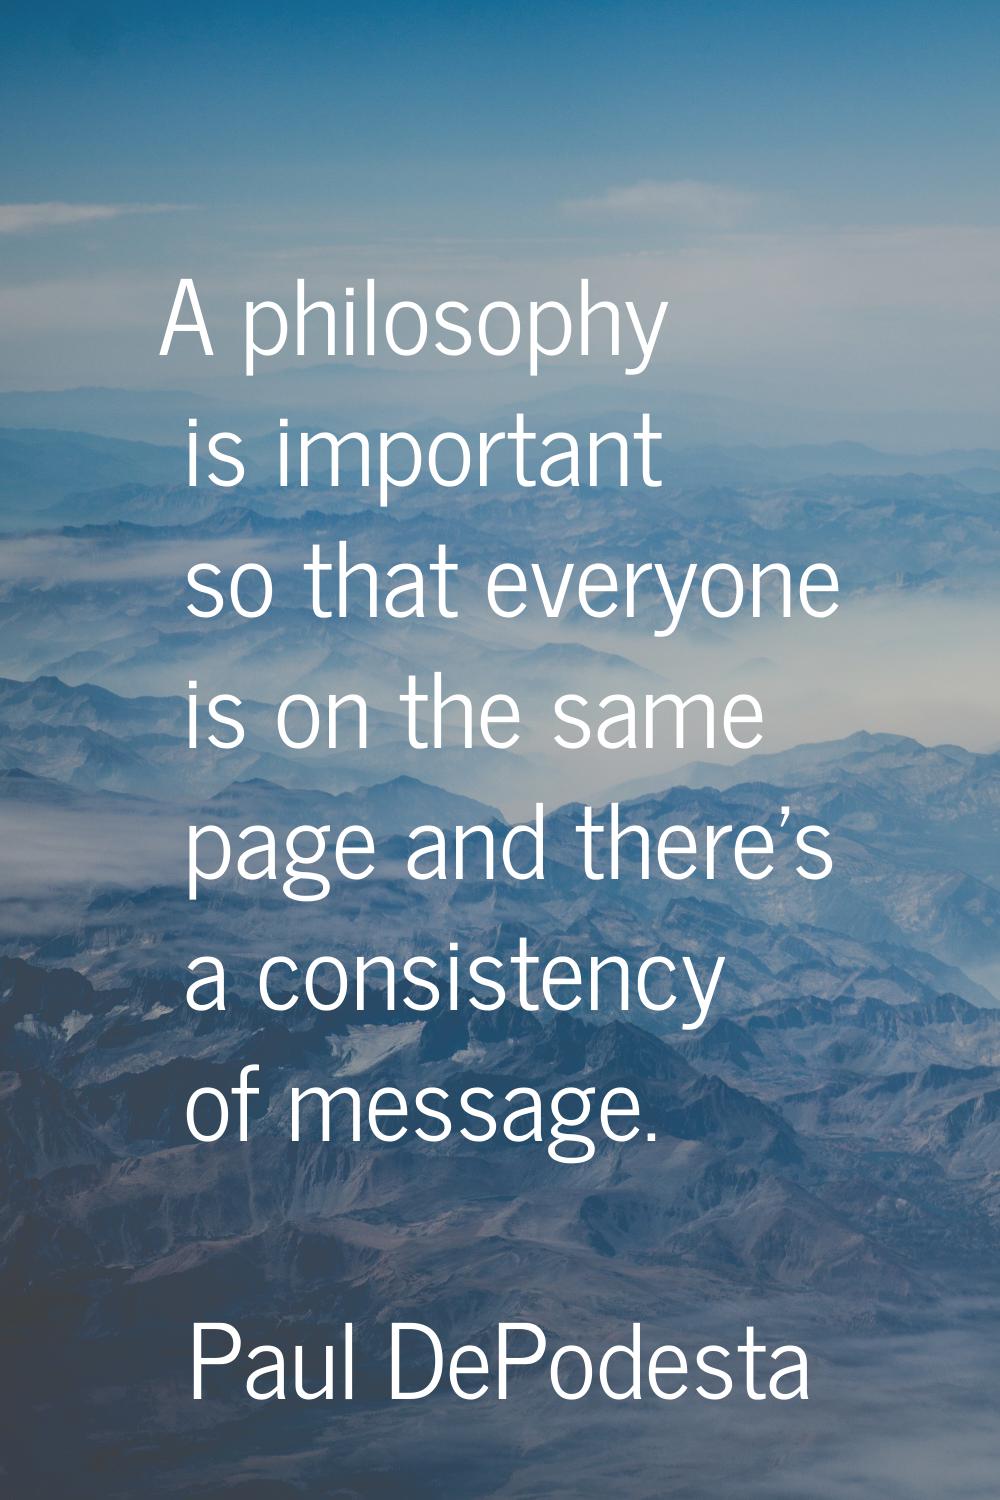 A philosophy is important so that everyone is on the same page and there's a consistency of message